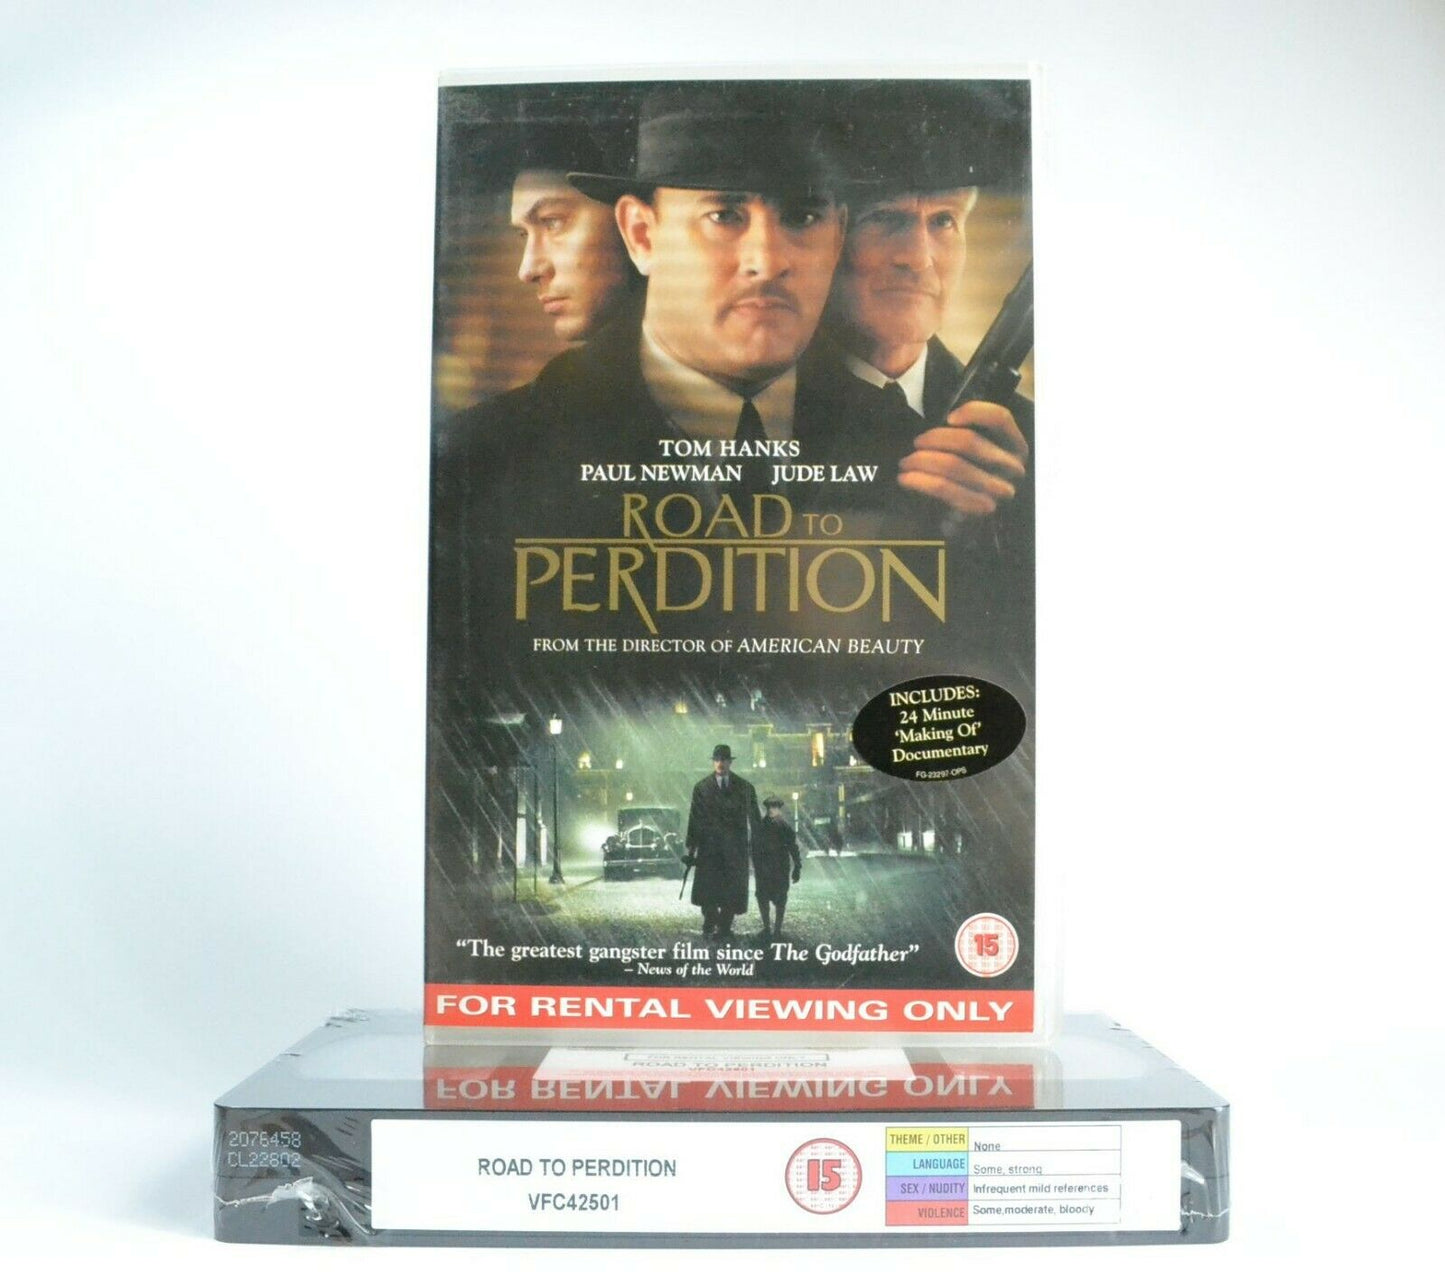 Road To Perdition: Brand New Sealed - Crime Action - Tom Hanks/Paul Newman - VHS-